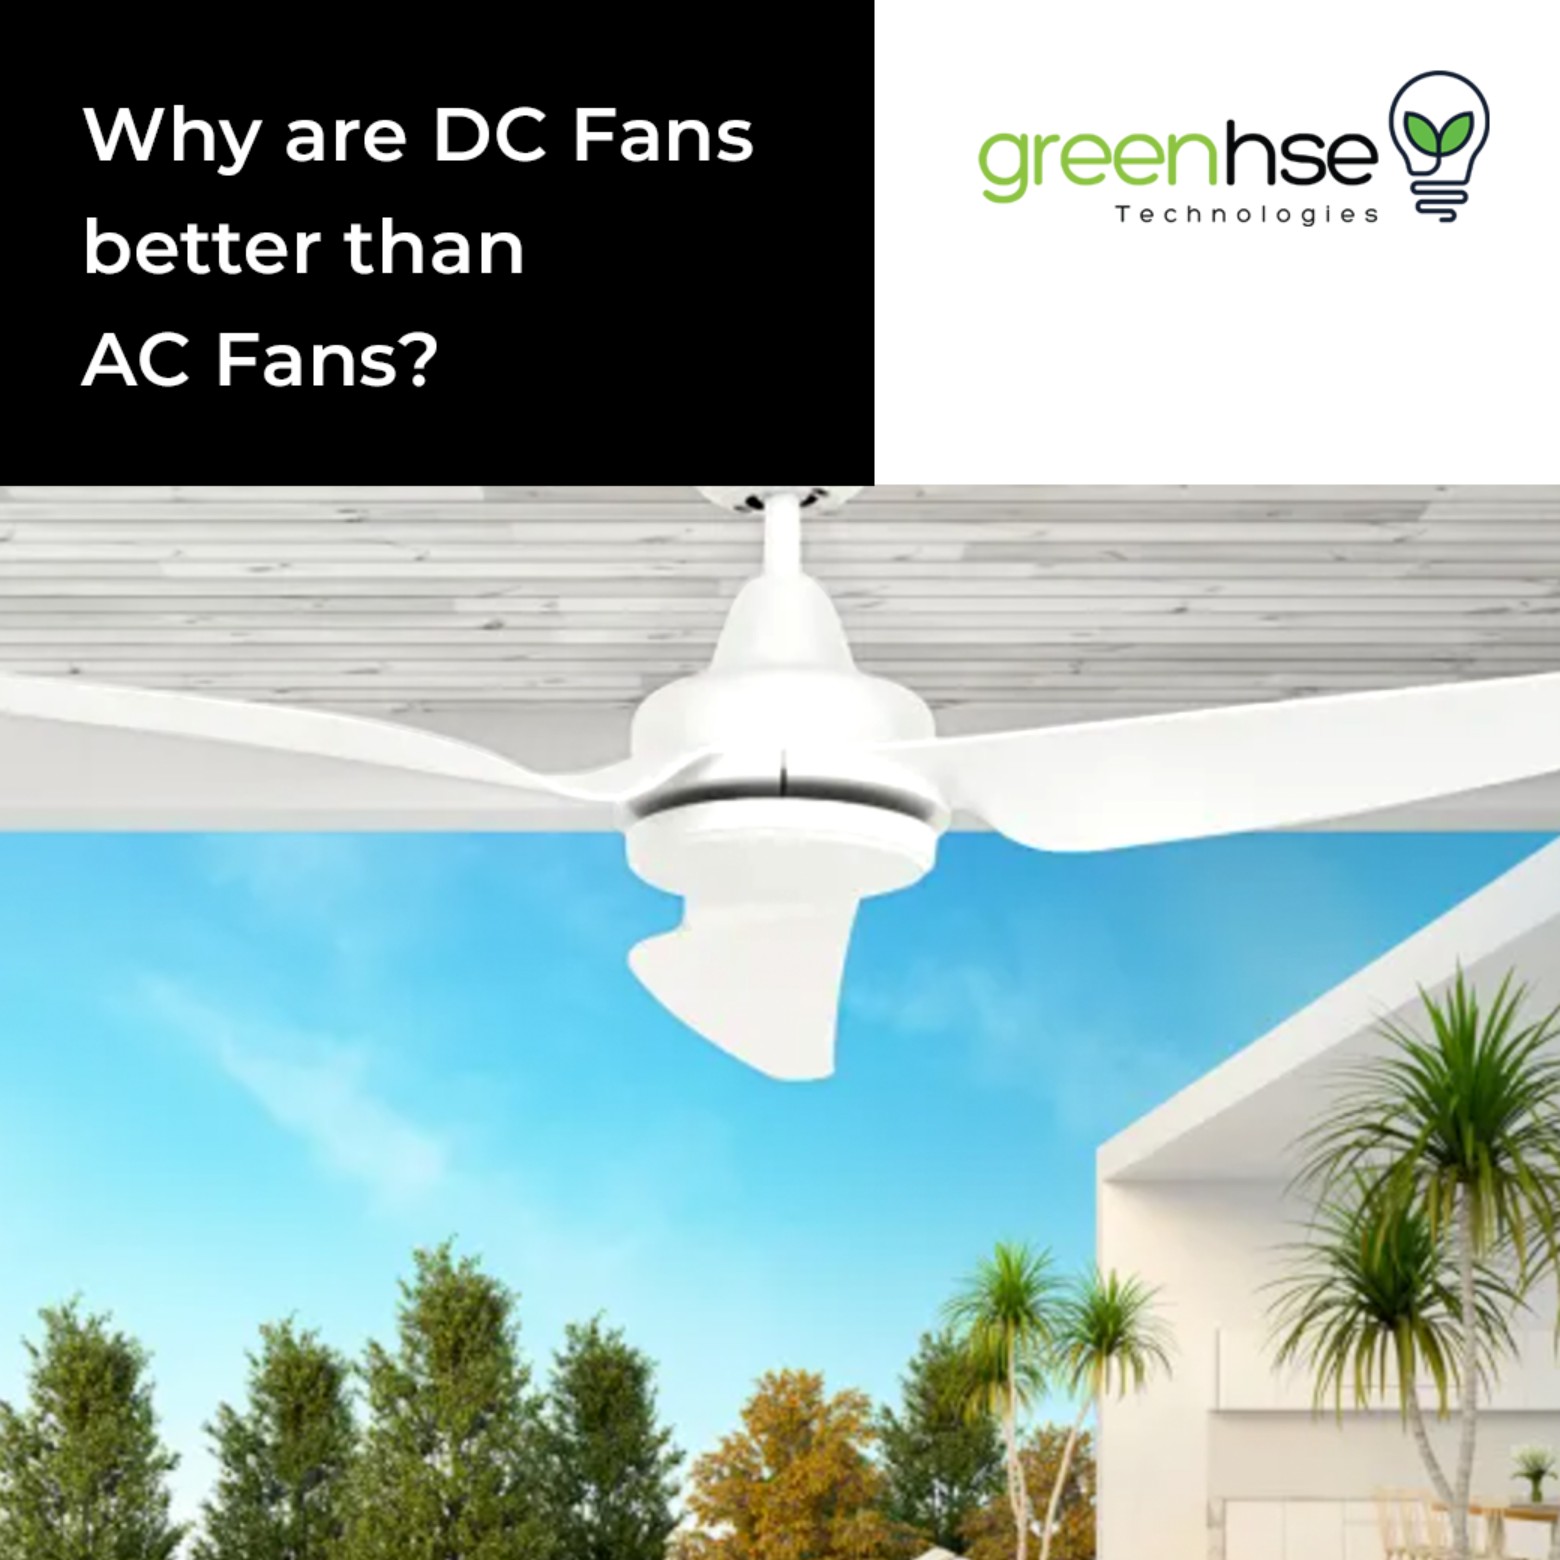 Why are DC Fans better than AC Fans?